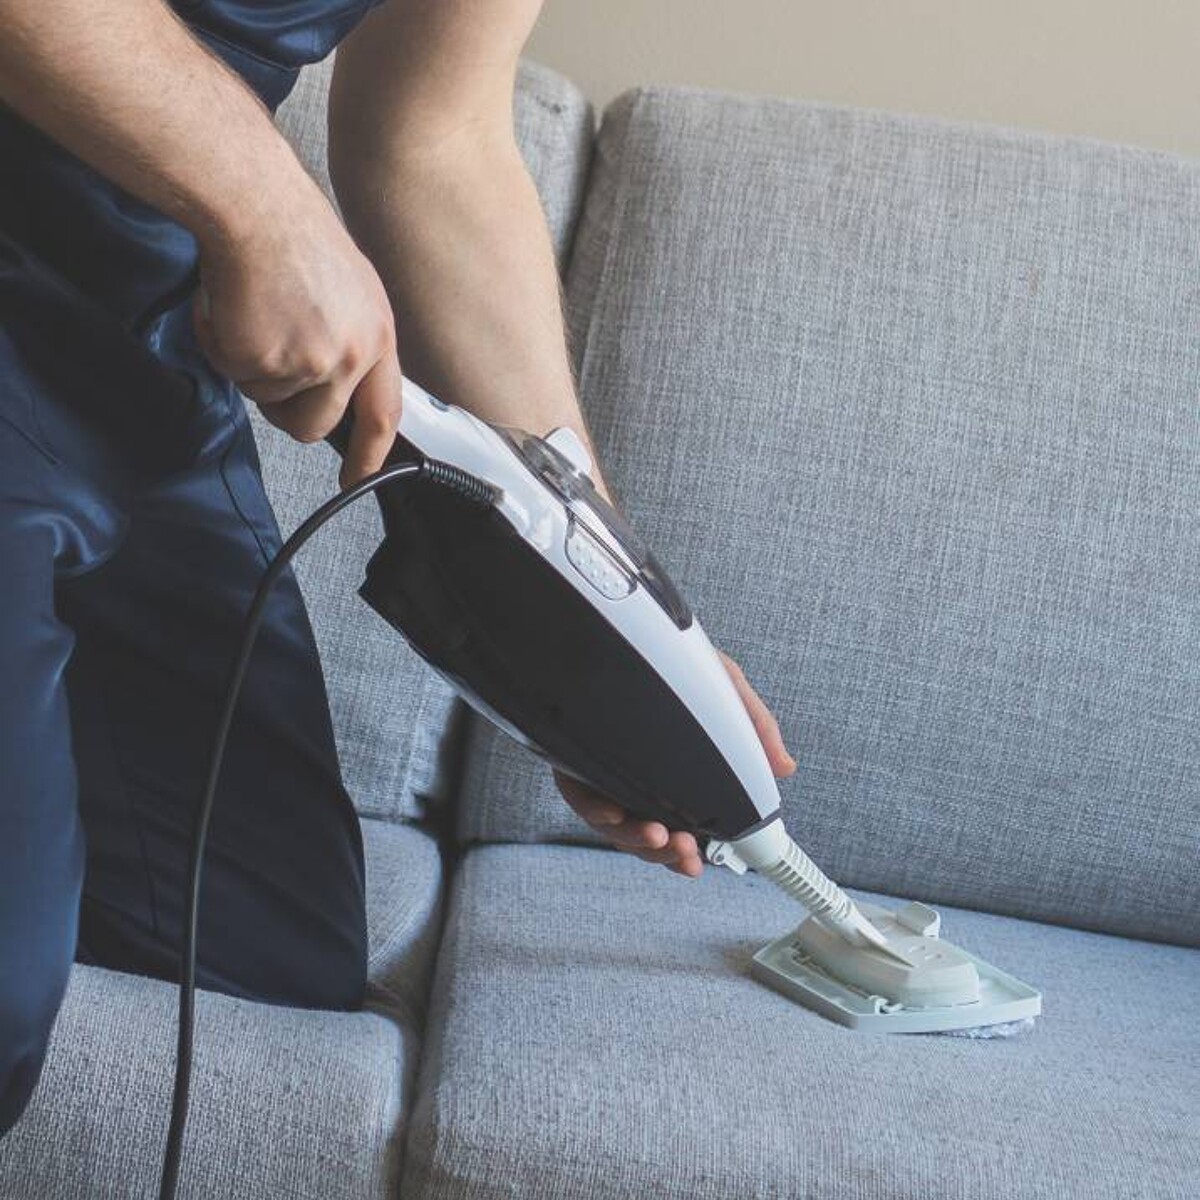 HELP! How Much Does Sofa Cleaning Cost on Average?